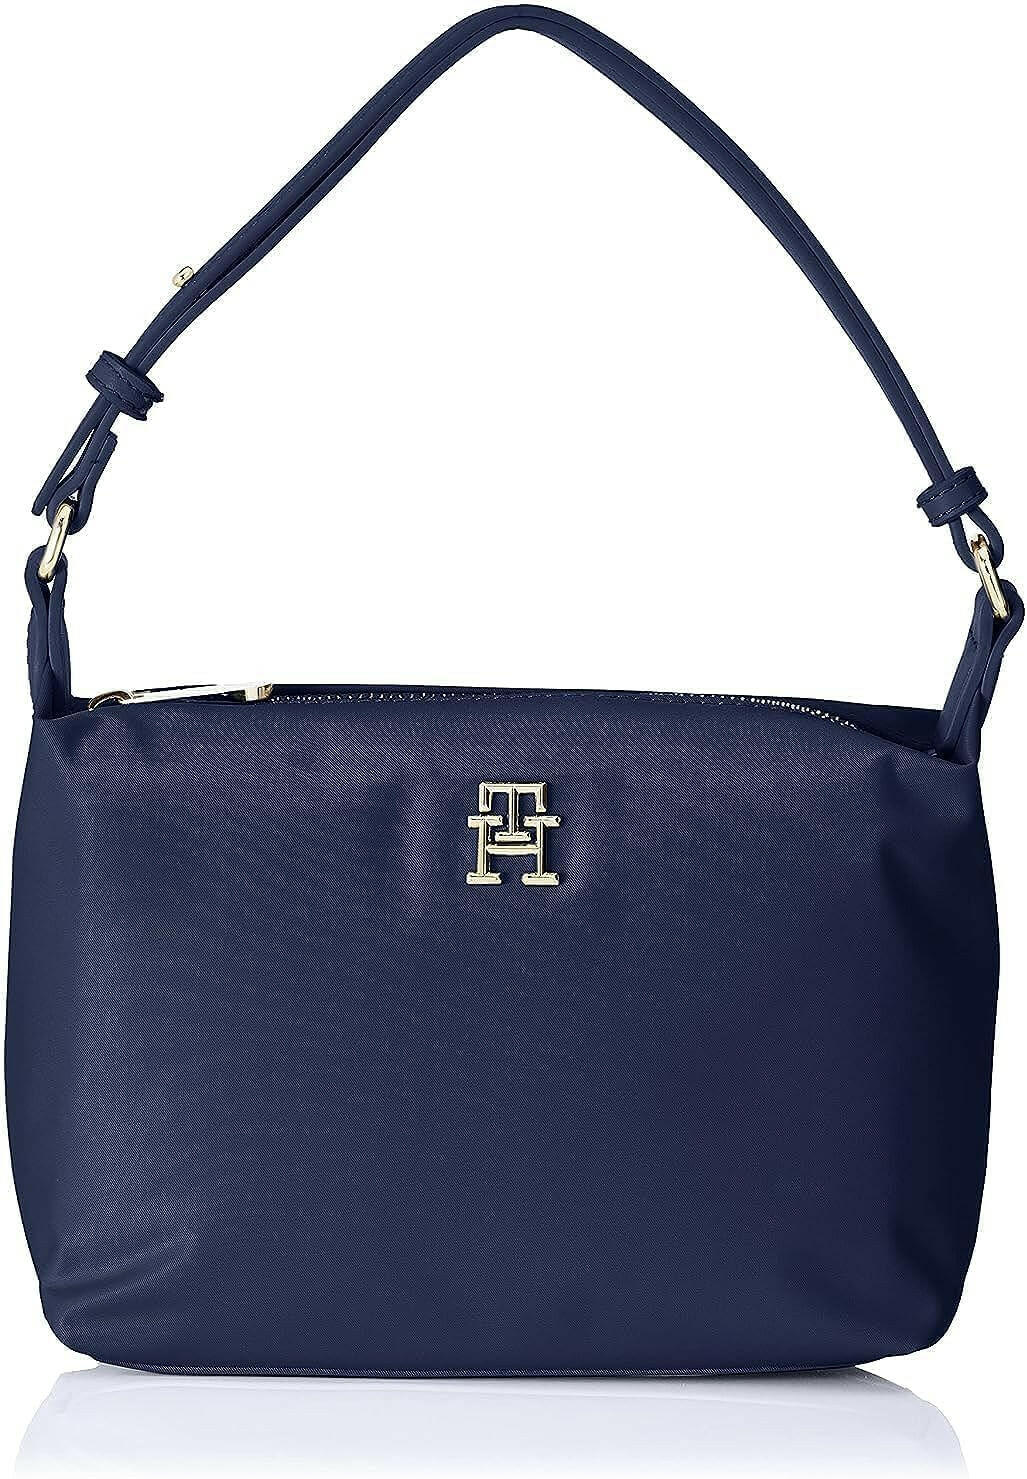 Tommy Hilfiger Women's POPPY TOTE APPLIQUE Tote Bag